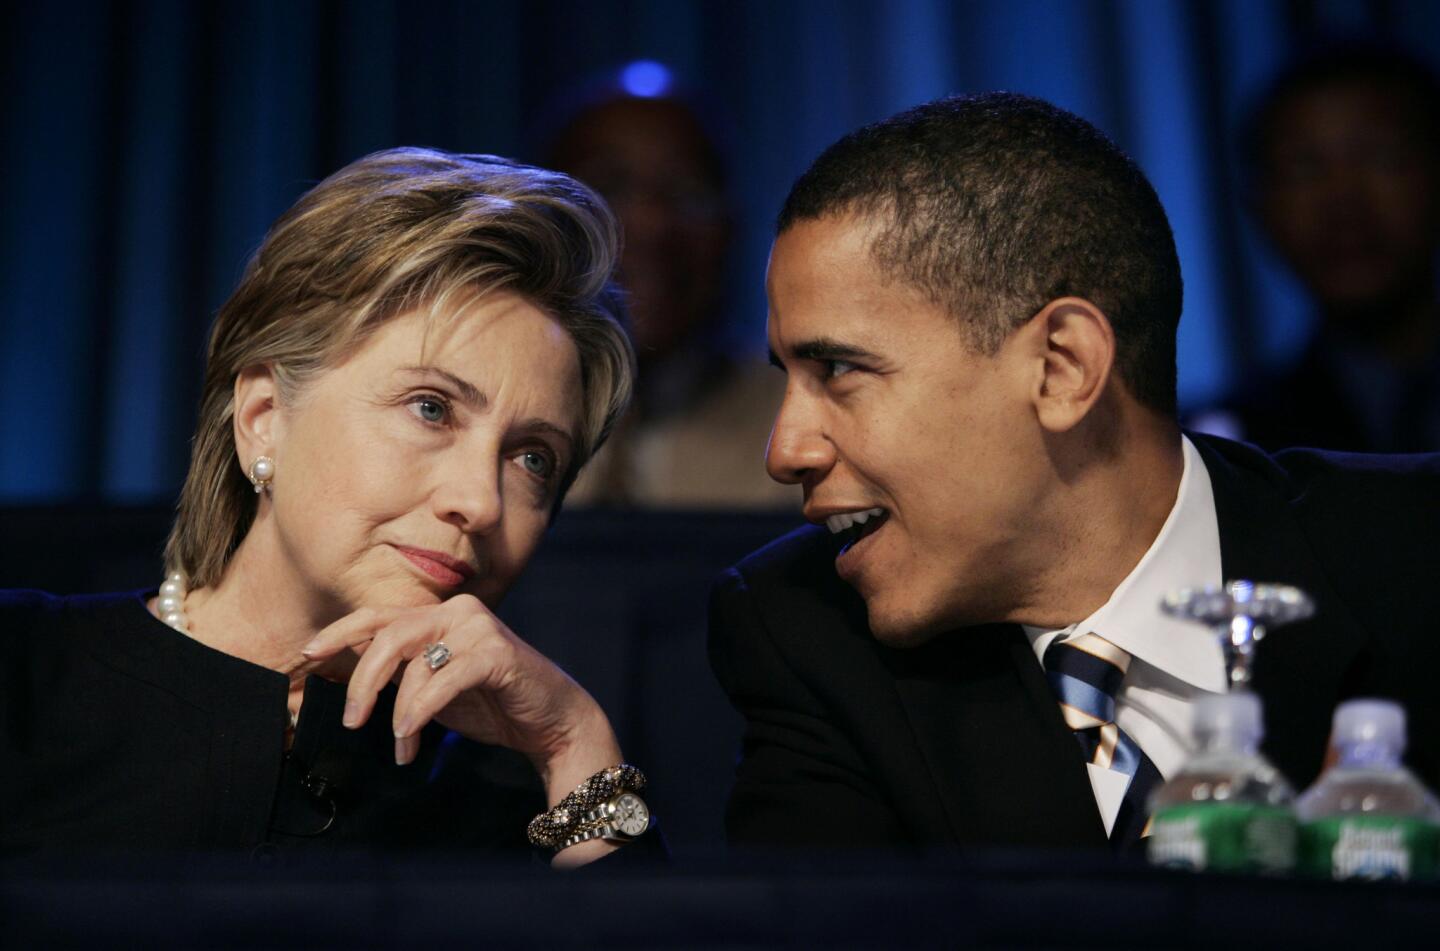 Then-U.S. Sen. Barack Obama speaks with then-U.S. Sen. Hillary Clinton during the annual convention of the National Association for the Advancement of Colored People.